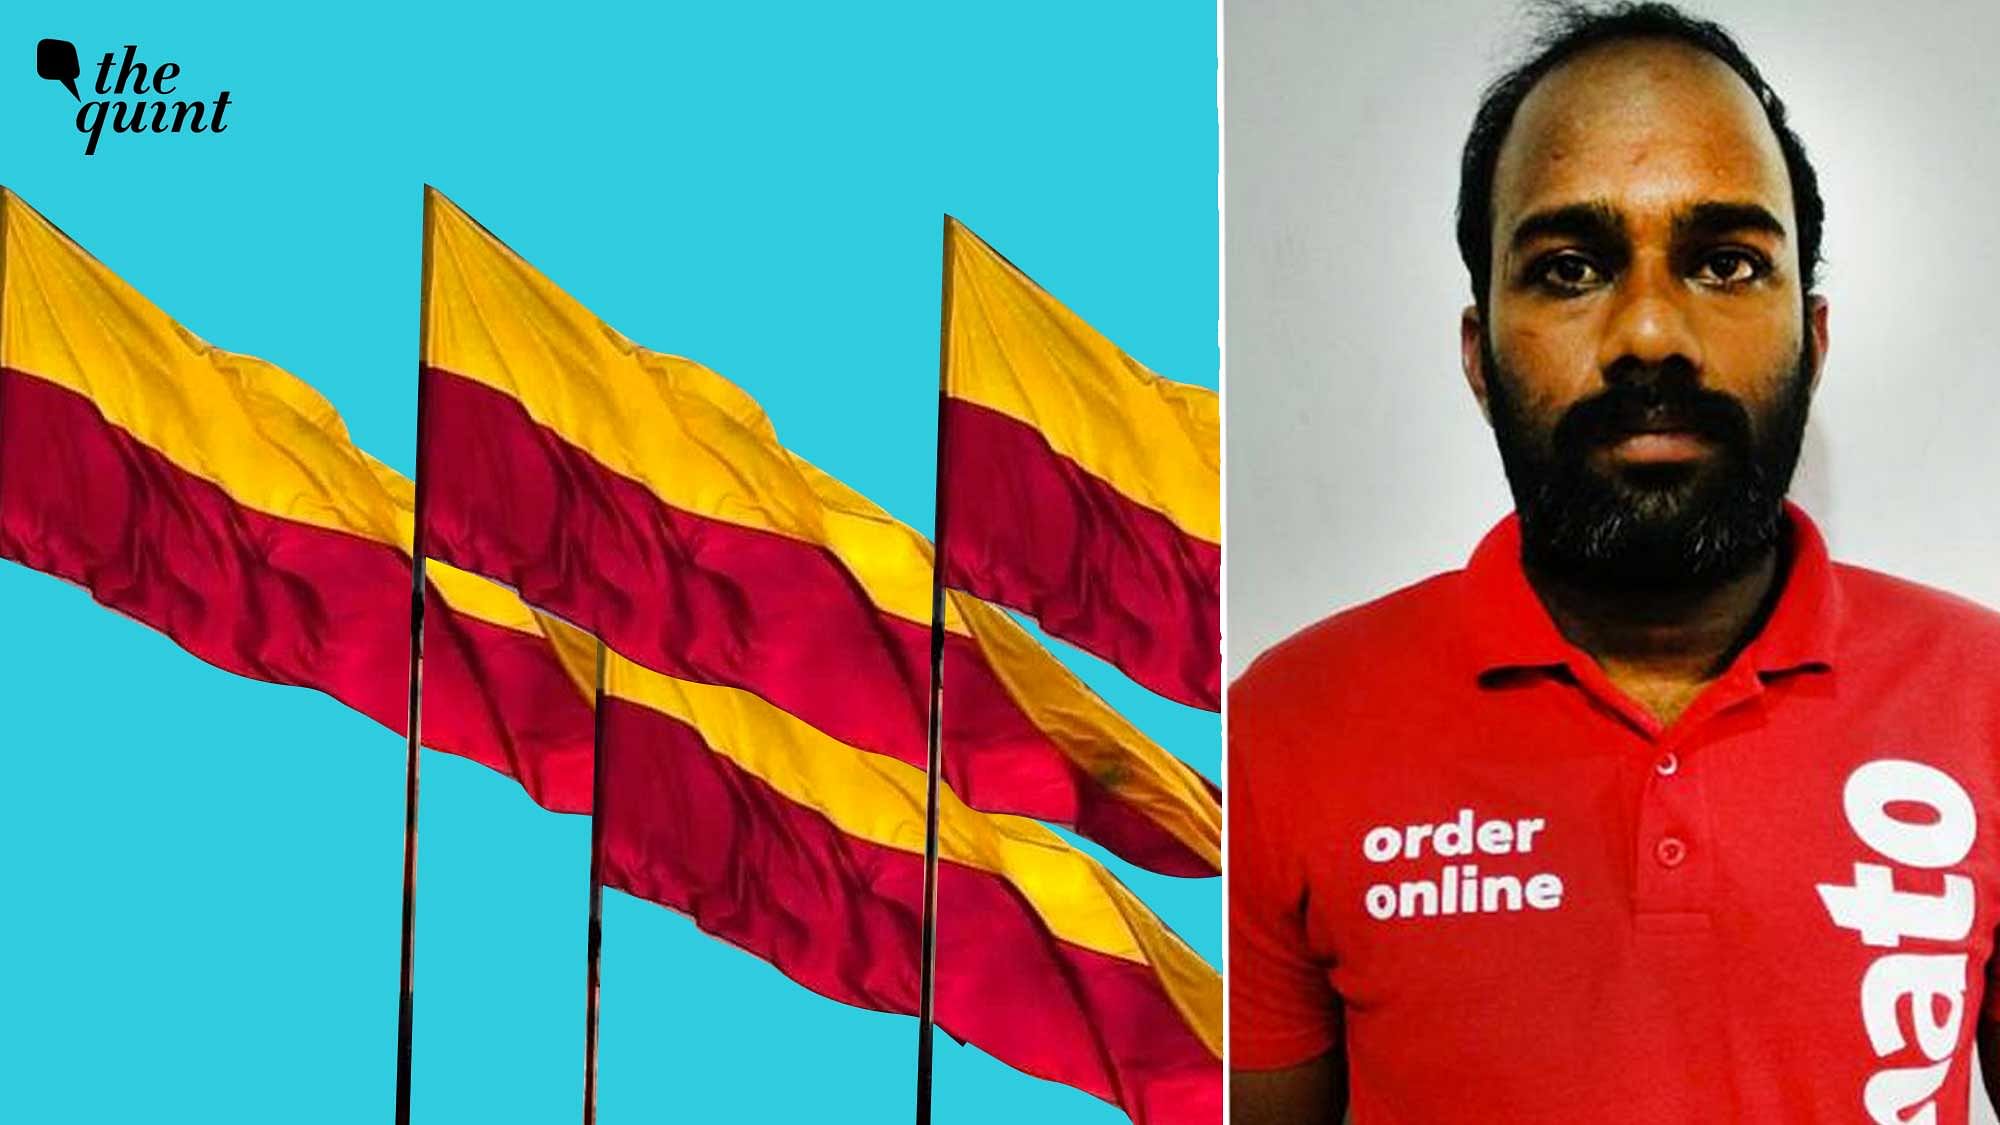 Kamaraj, a Zomato delivery executive and Hitesha Chandranee, a software professional, have accused each other of assault. Kamaraj now has the support of Kannada language organisations